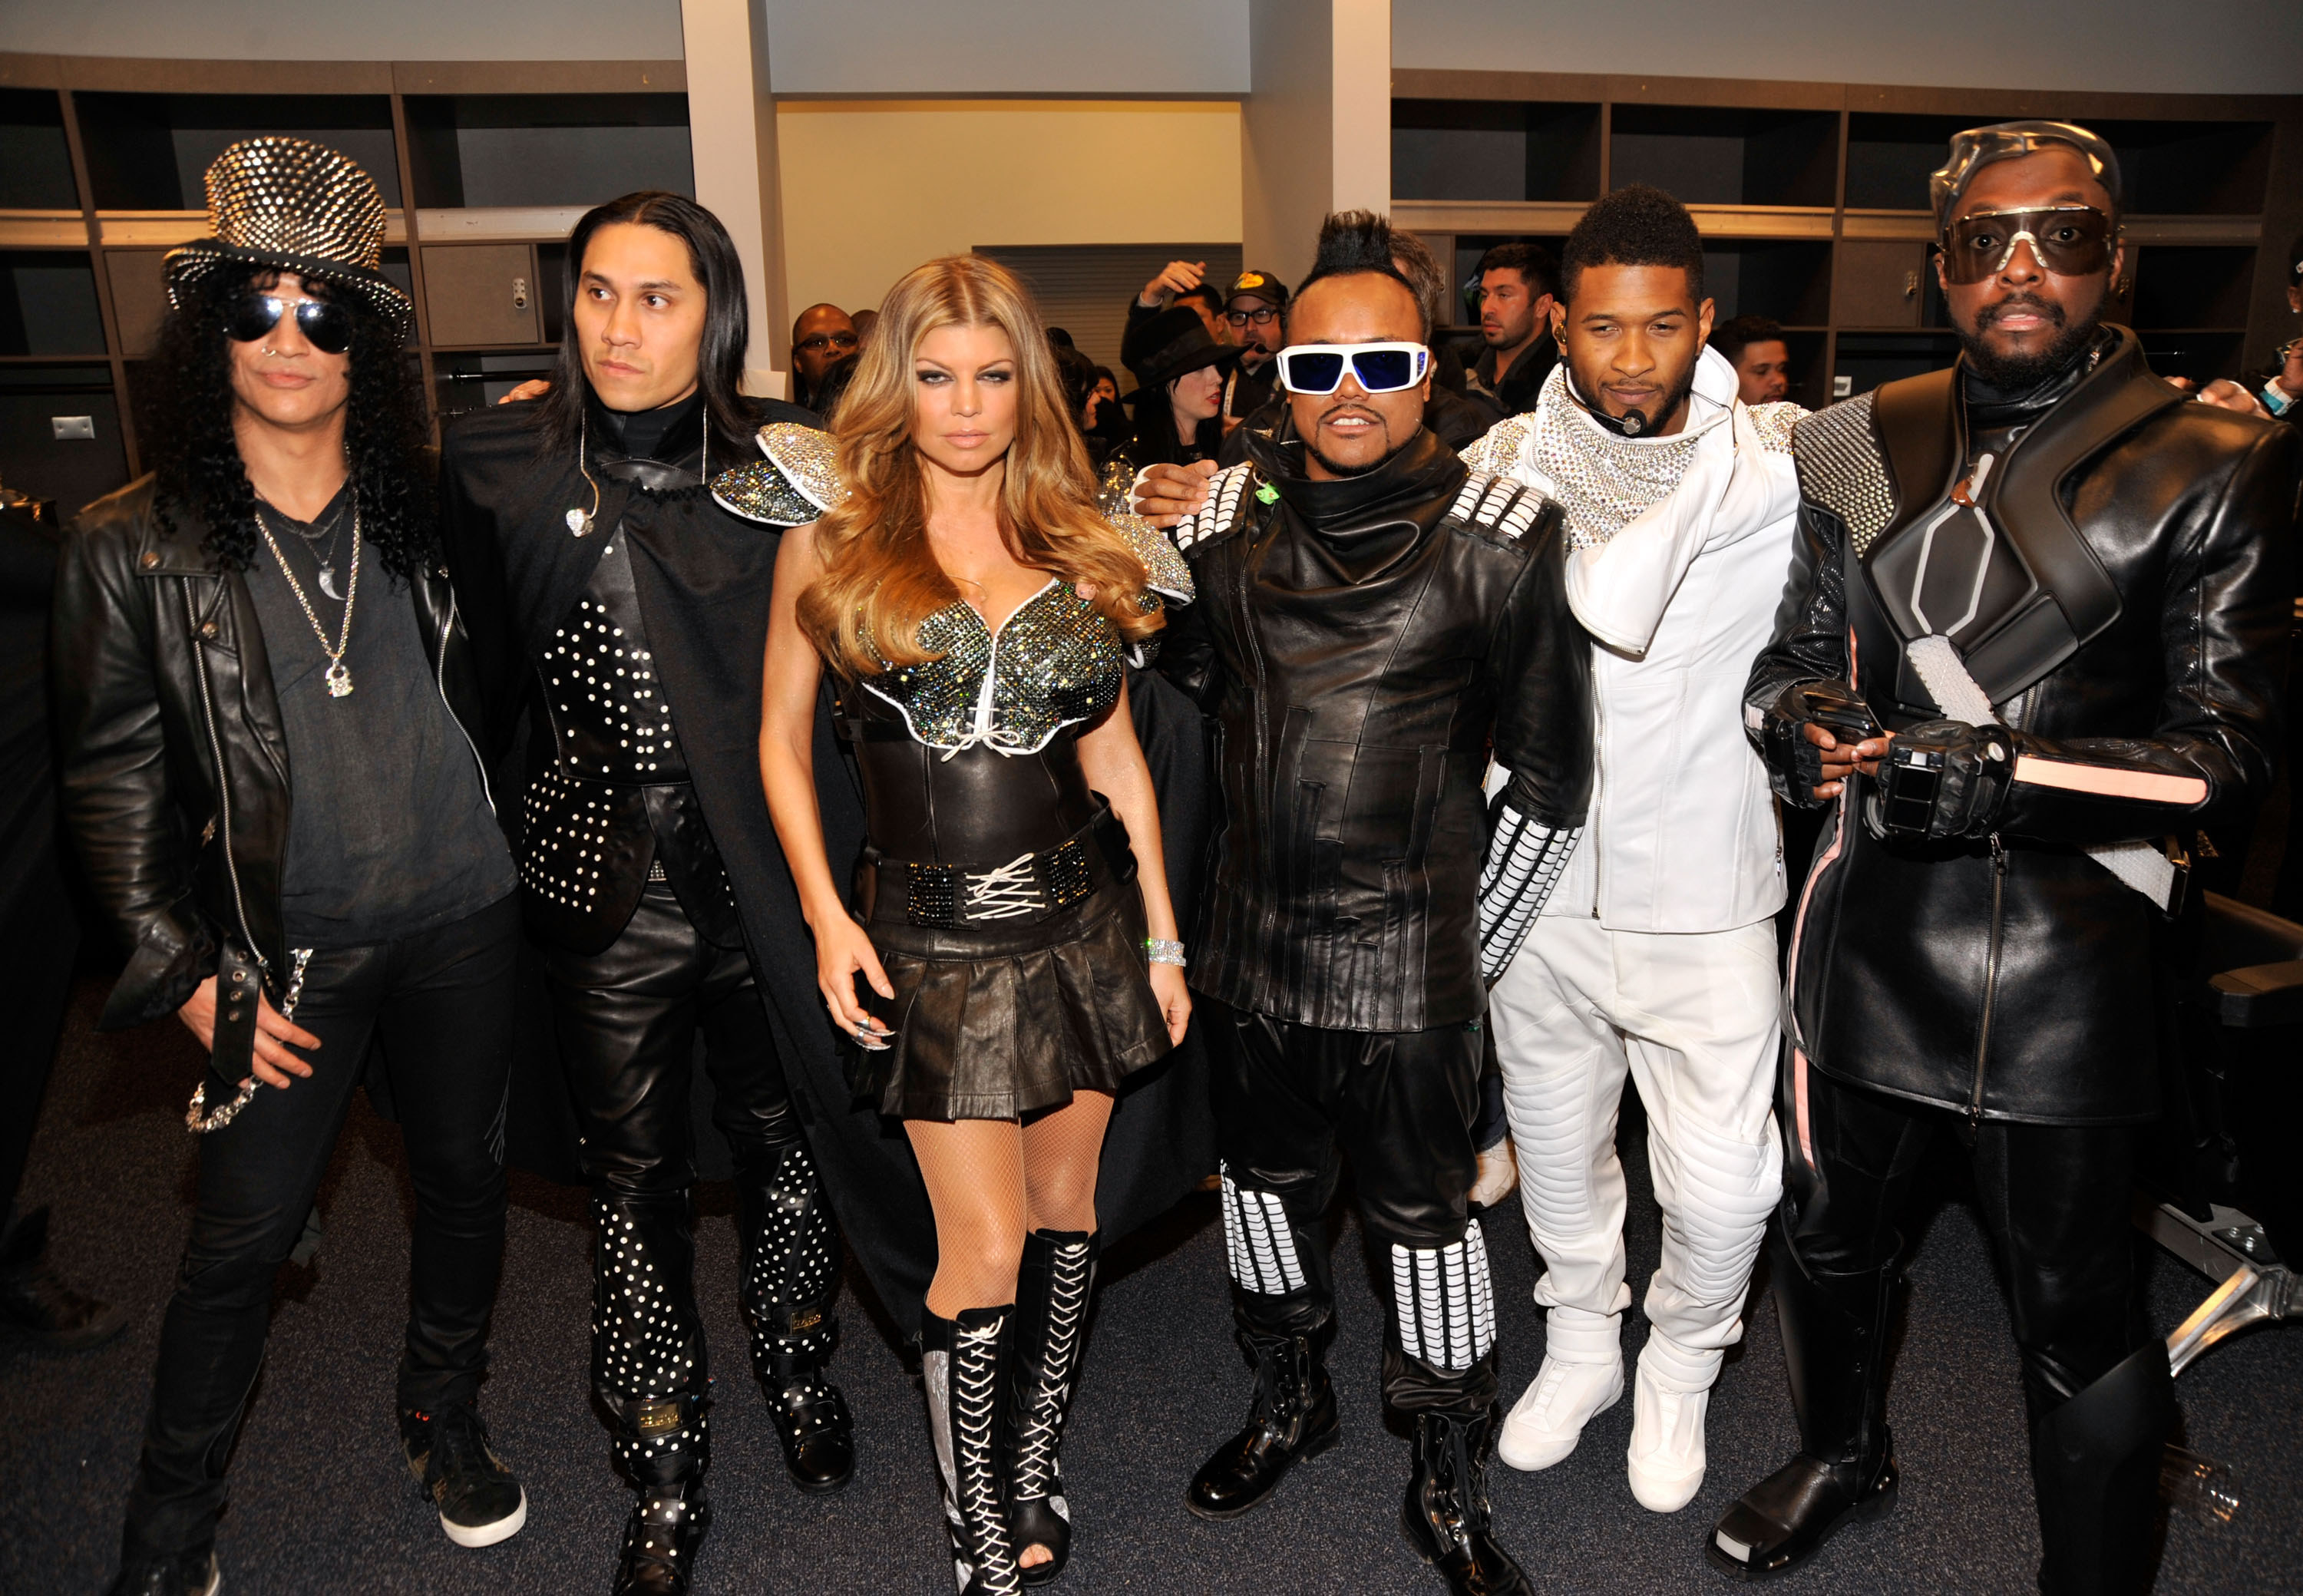 Slash and Taboo, Fergie and apl.de.ap of The Black Eyed Peas, Usher and will.i.am of The Black Eyed Peas attend the Bridgestone Super Bowl XLV Halftime Show